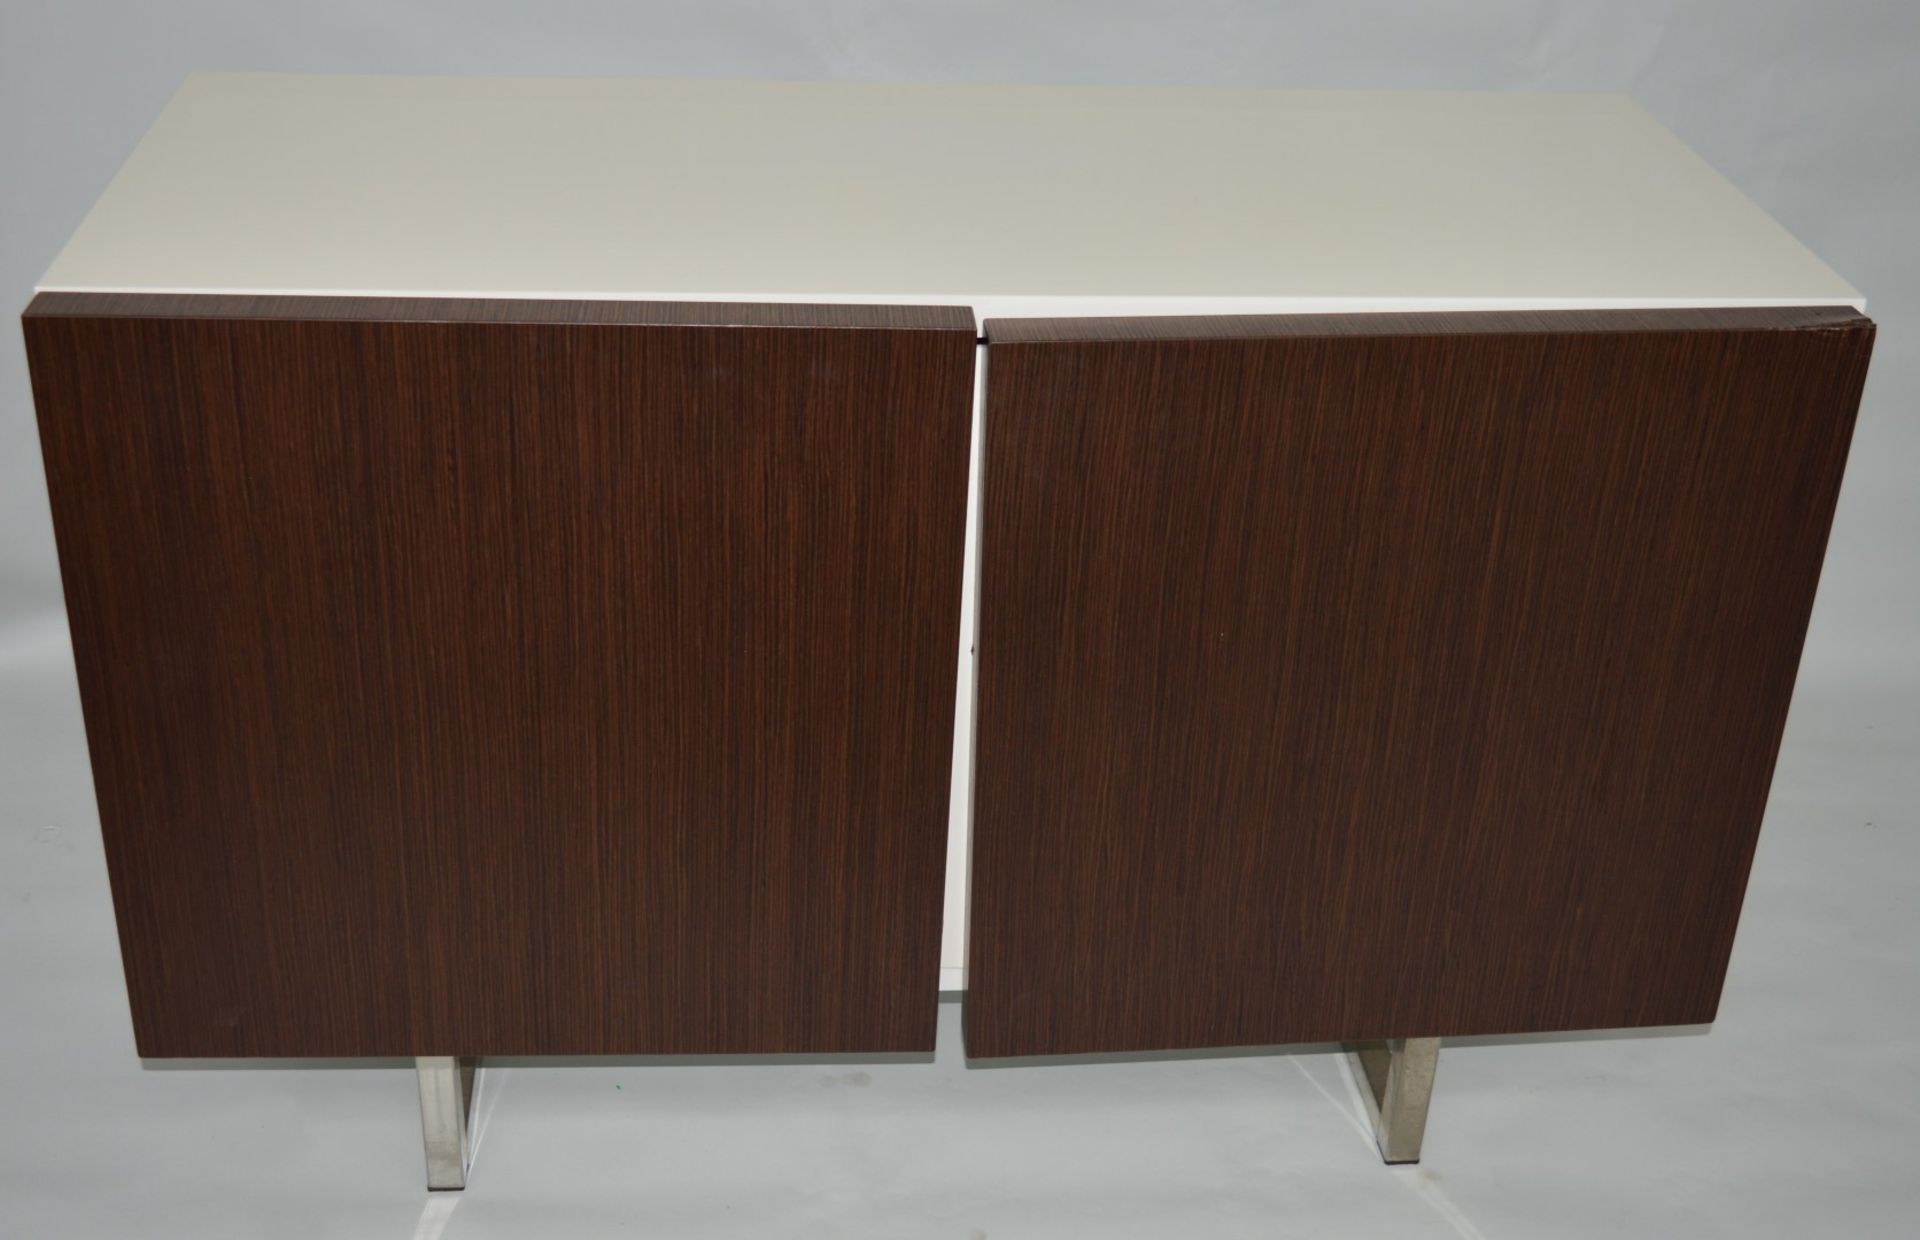 1 x Calligaris Seattle Glossy White 2 Door Sideboard - (cs6004-1) - Ref: 1670447 - CL087 - Location: - Image 2 of 7